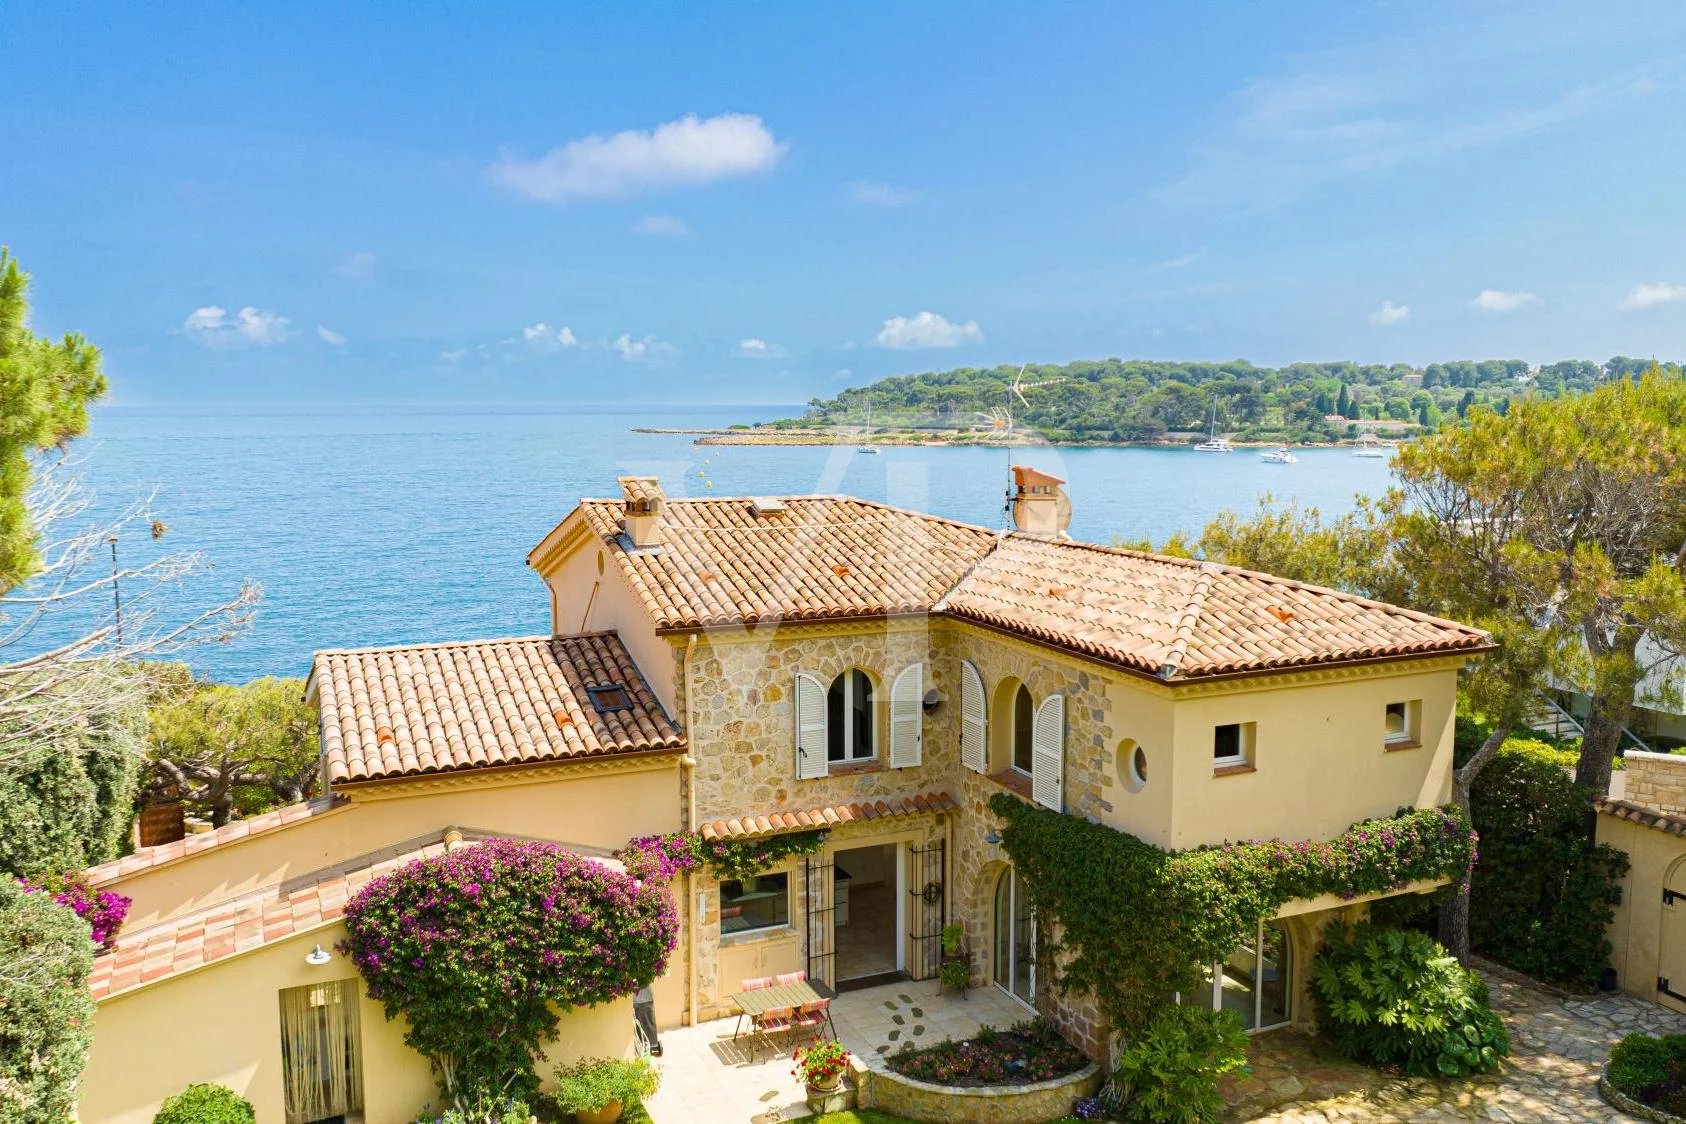 Waterfront property on the Cap d’Antibes